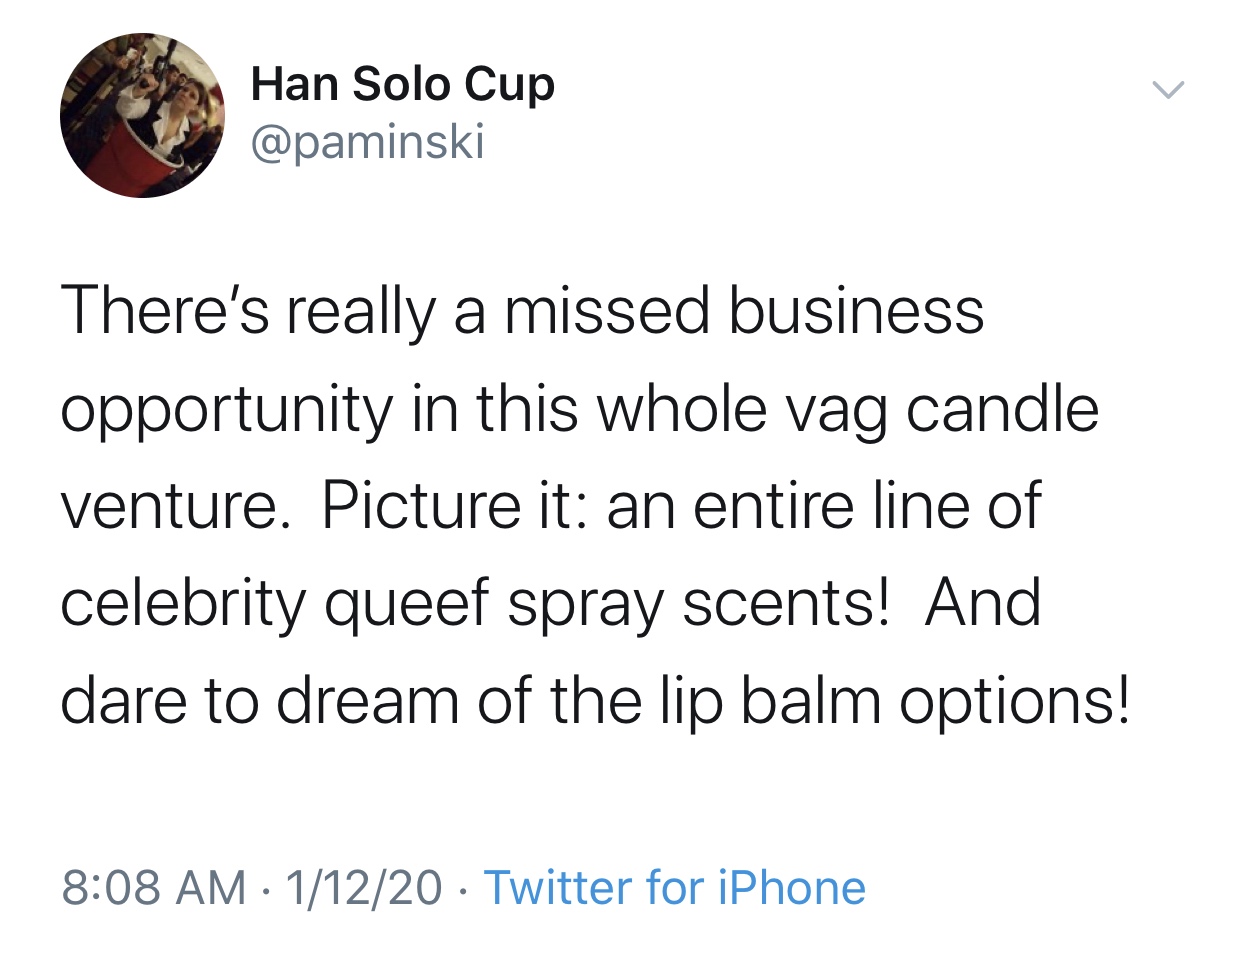 personality will i be today meme - Han Solo Cup There's really a missed business opportunity in this whole vag candle venture. Picture it an entire line of celebrity queef spray scents! And dare to dream of the lip balm options! 11220 Twitter for iPhone